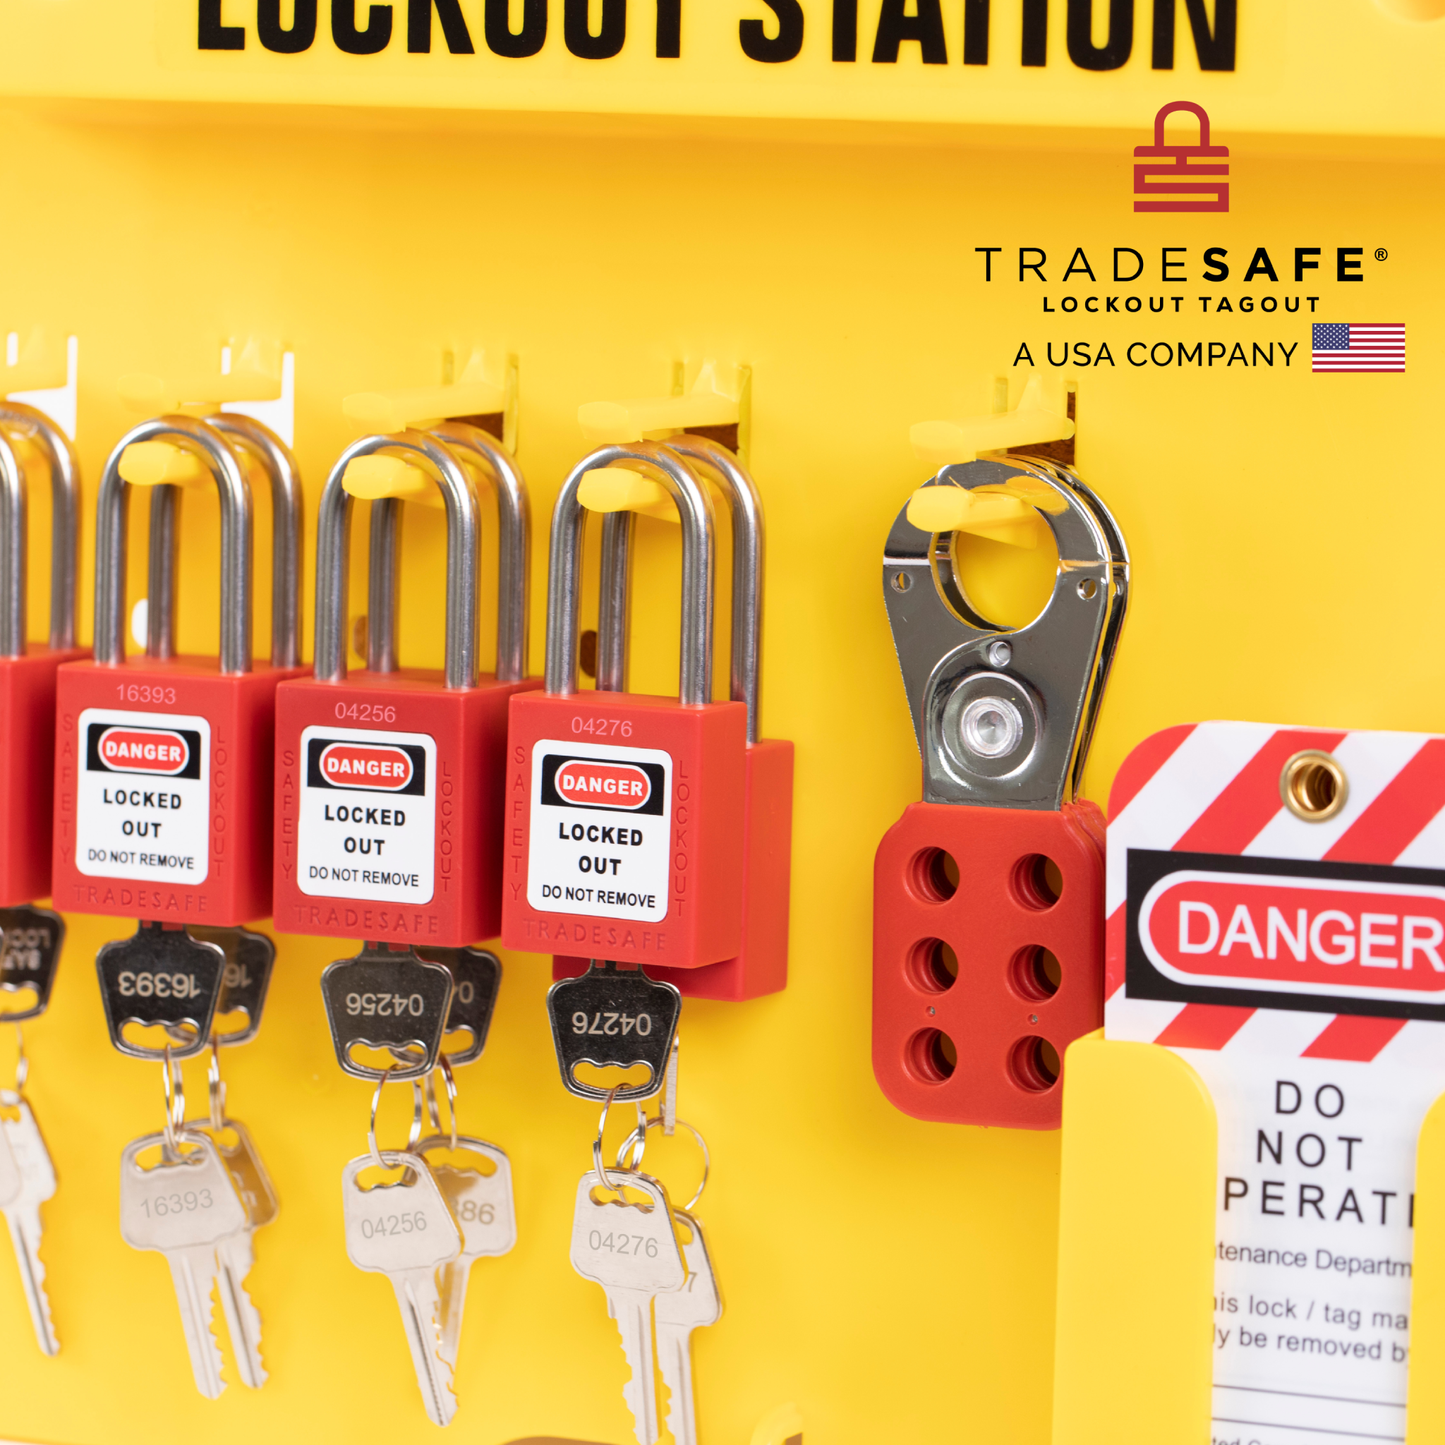 close-up view of a yellow loto station stocked with tags, hasps, and padlocks